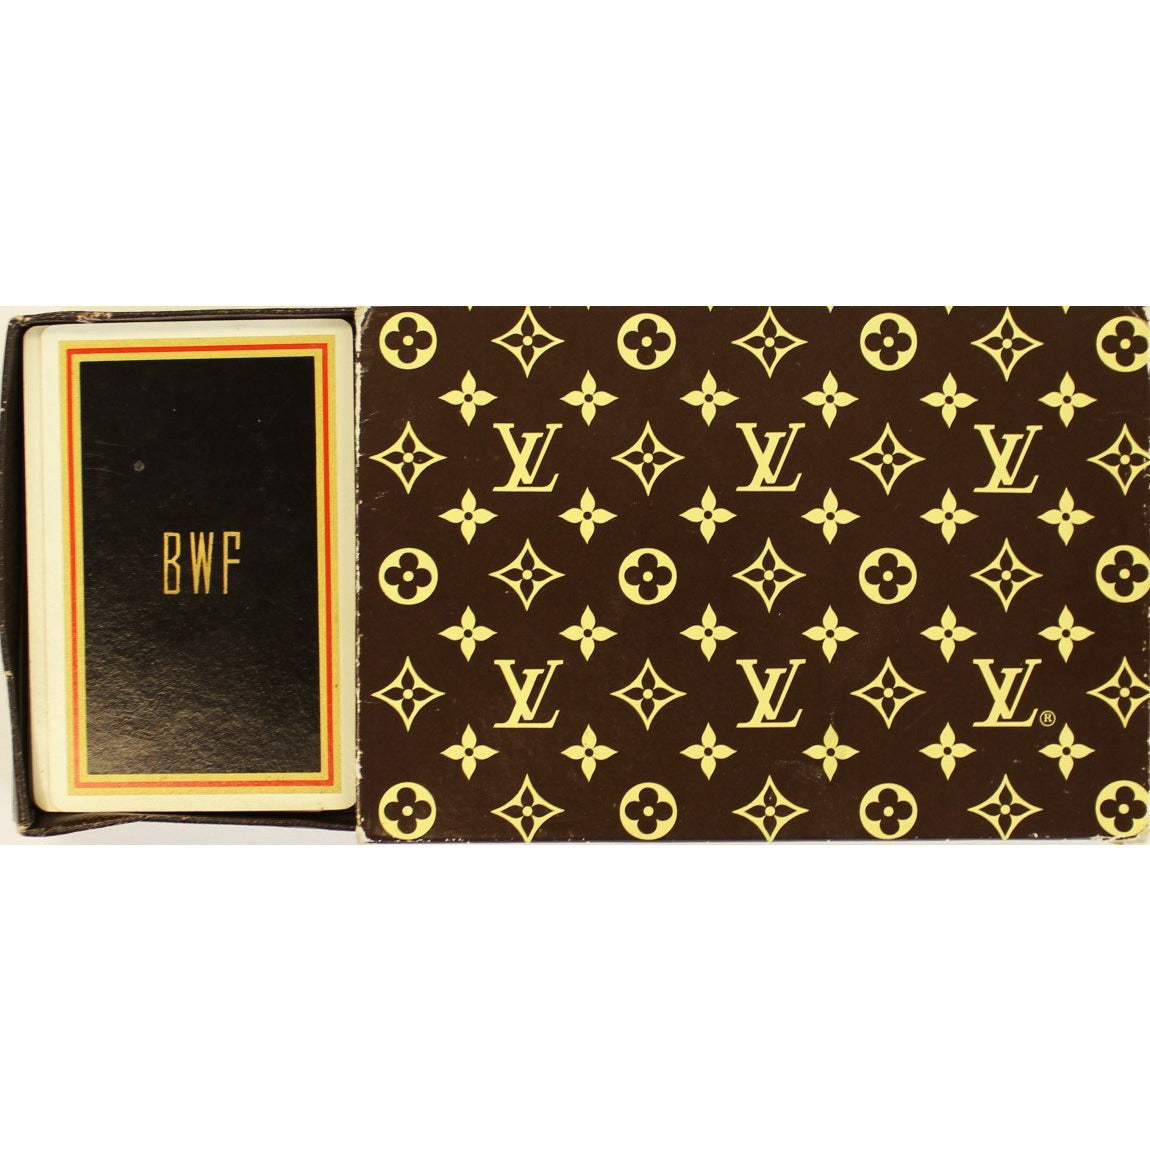 Louis Vuitton Twin Deck of "BWF" Playing Cards